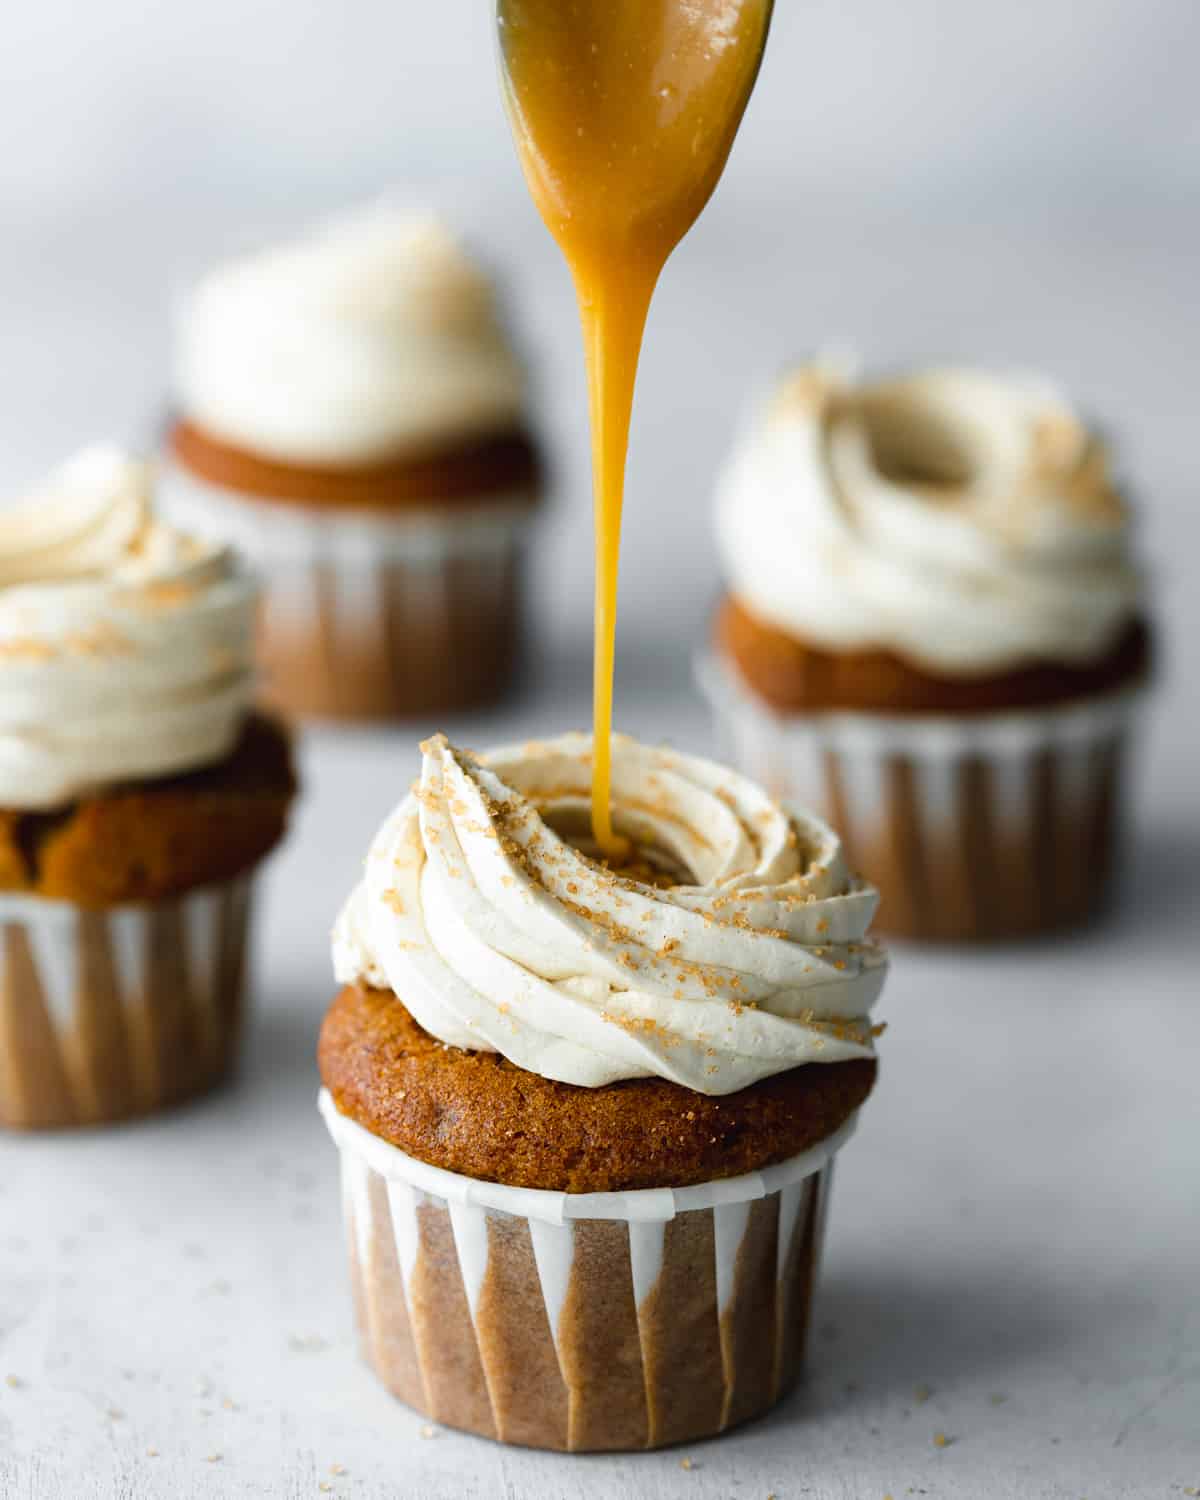 cupcakes being filled with caramel sauce.